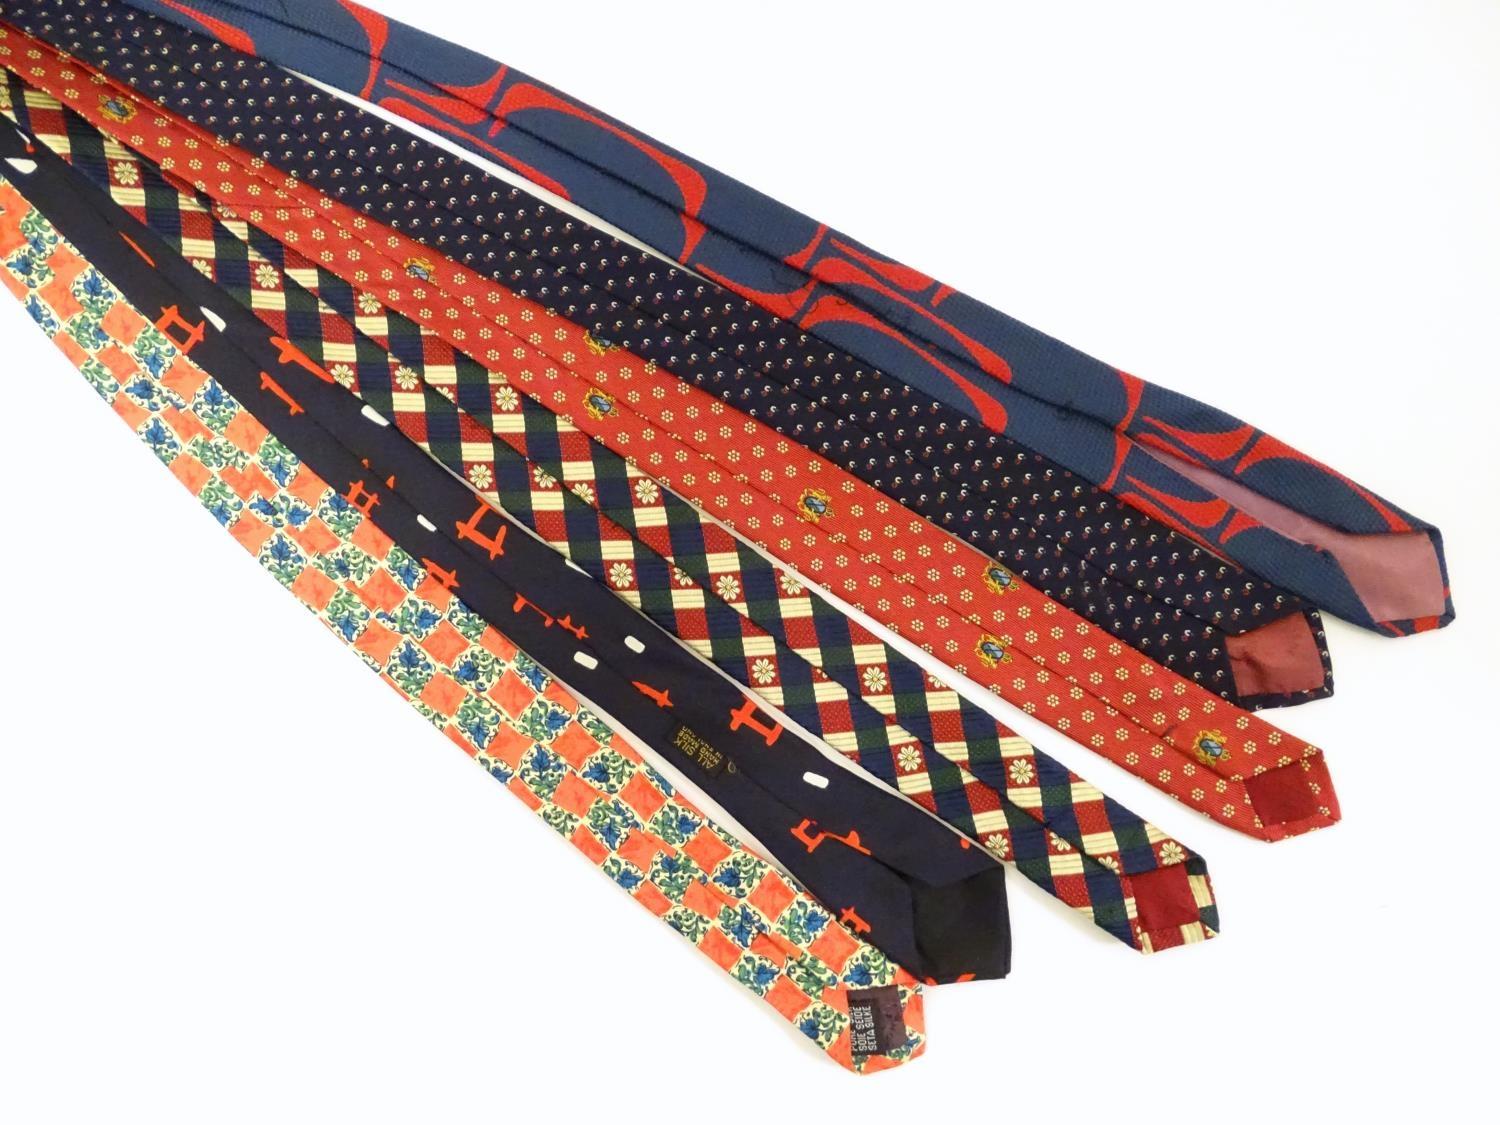 6 silk ties in navy and reds by Austin Reed, Tittorio, Pink and John Harmer (6) Please Note - we - Image 2 of 9